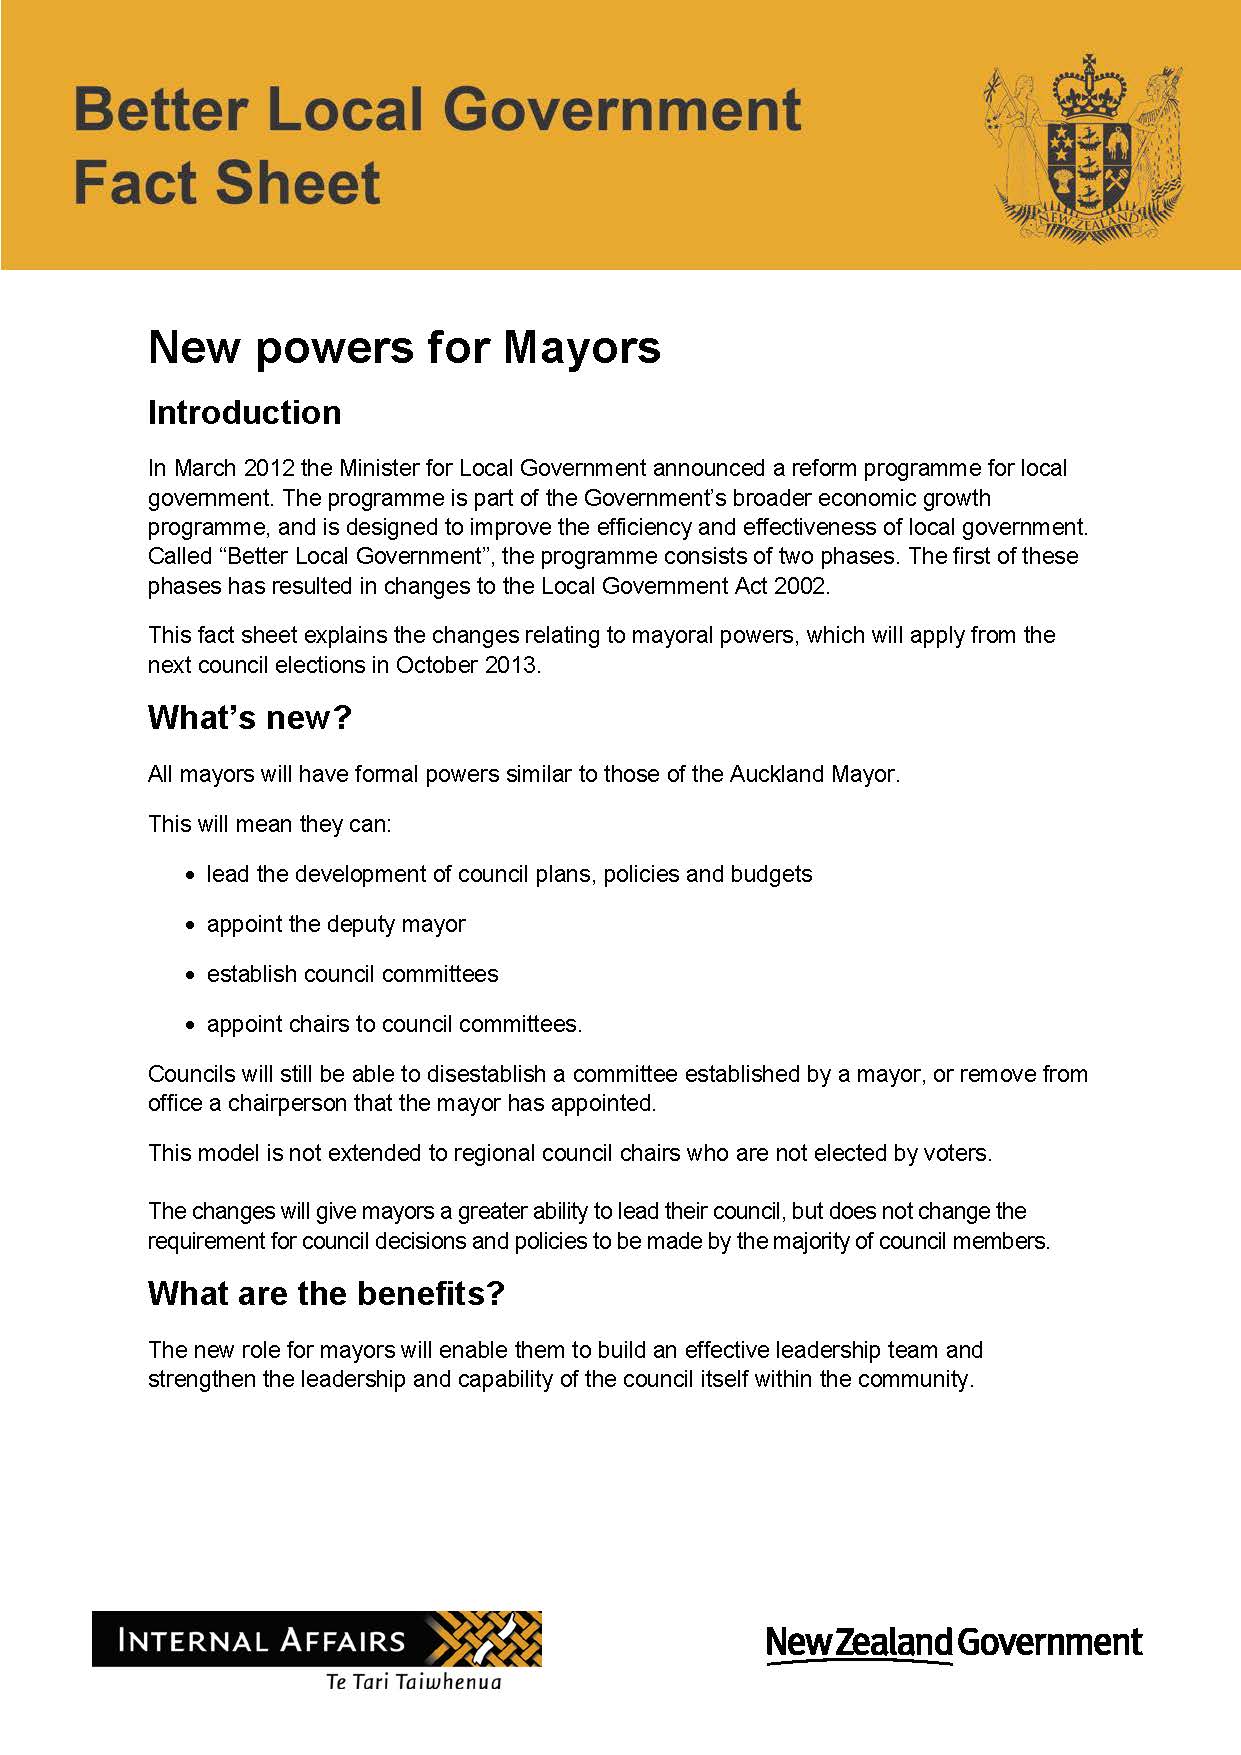 Decorative thumbnail image of a Better Local Government Fact Sheet